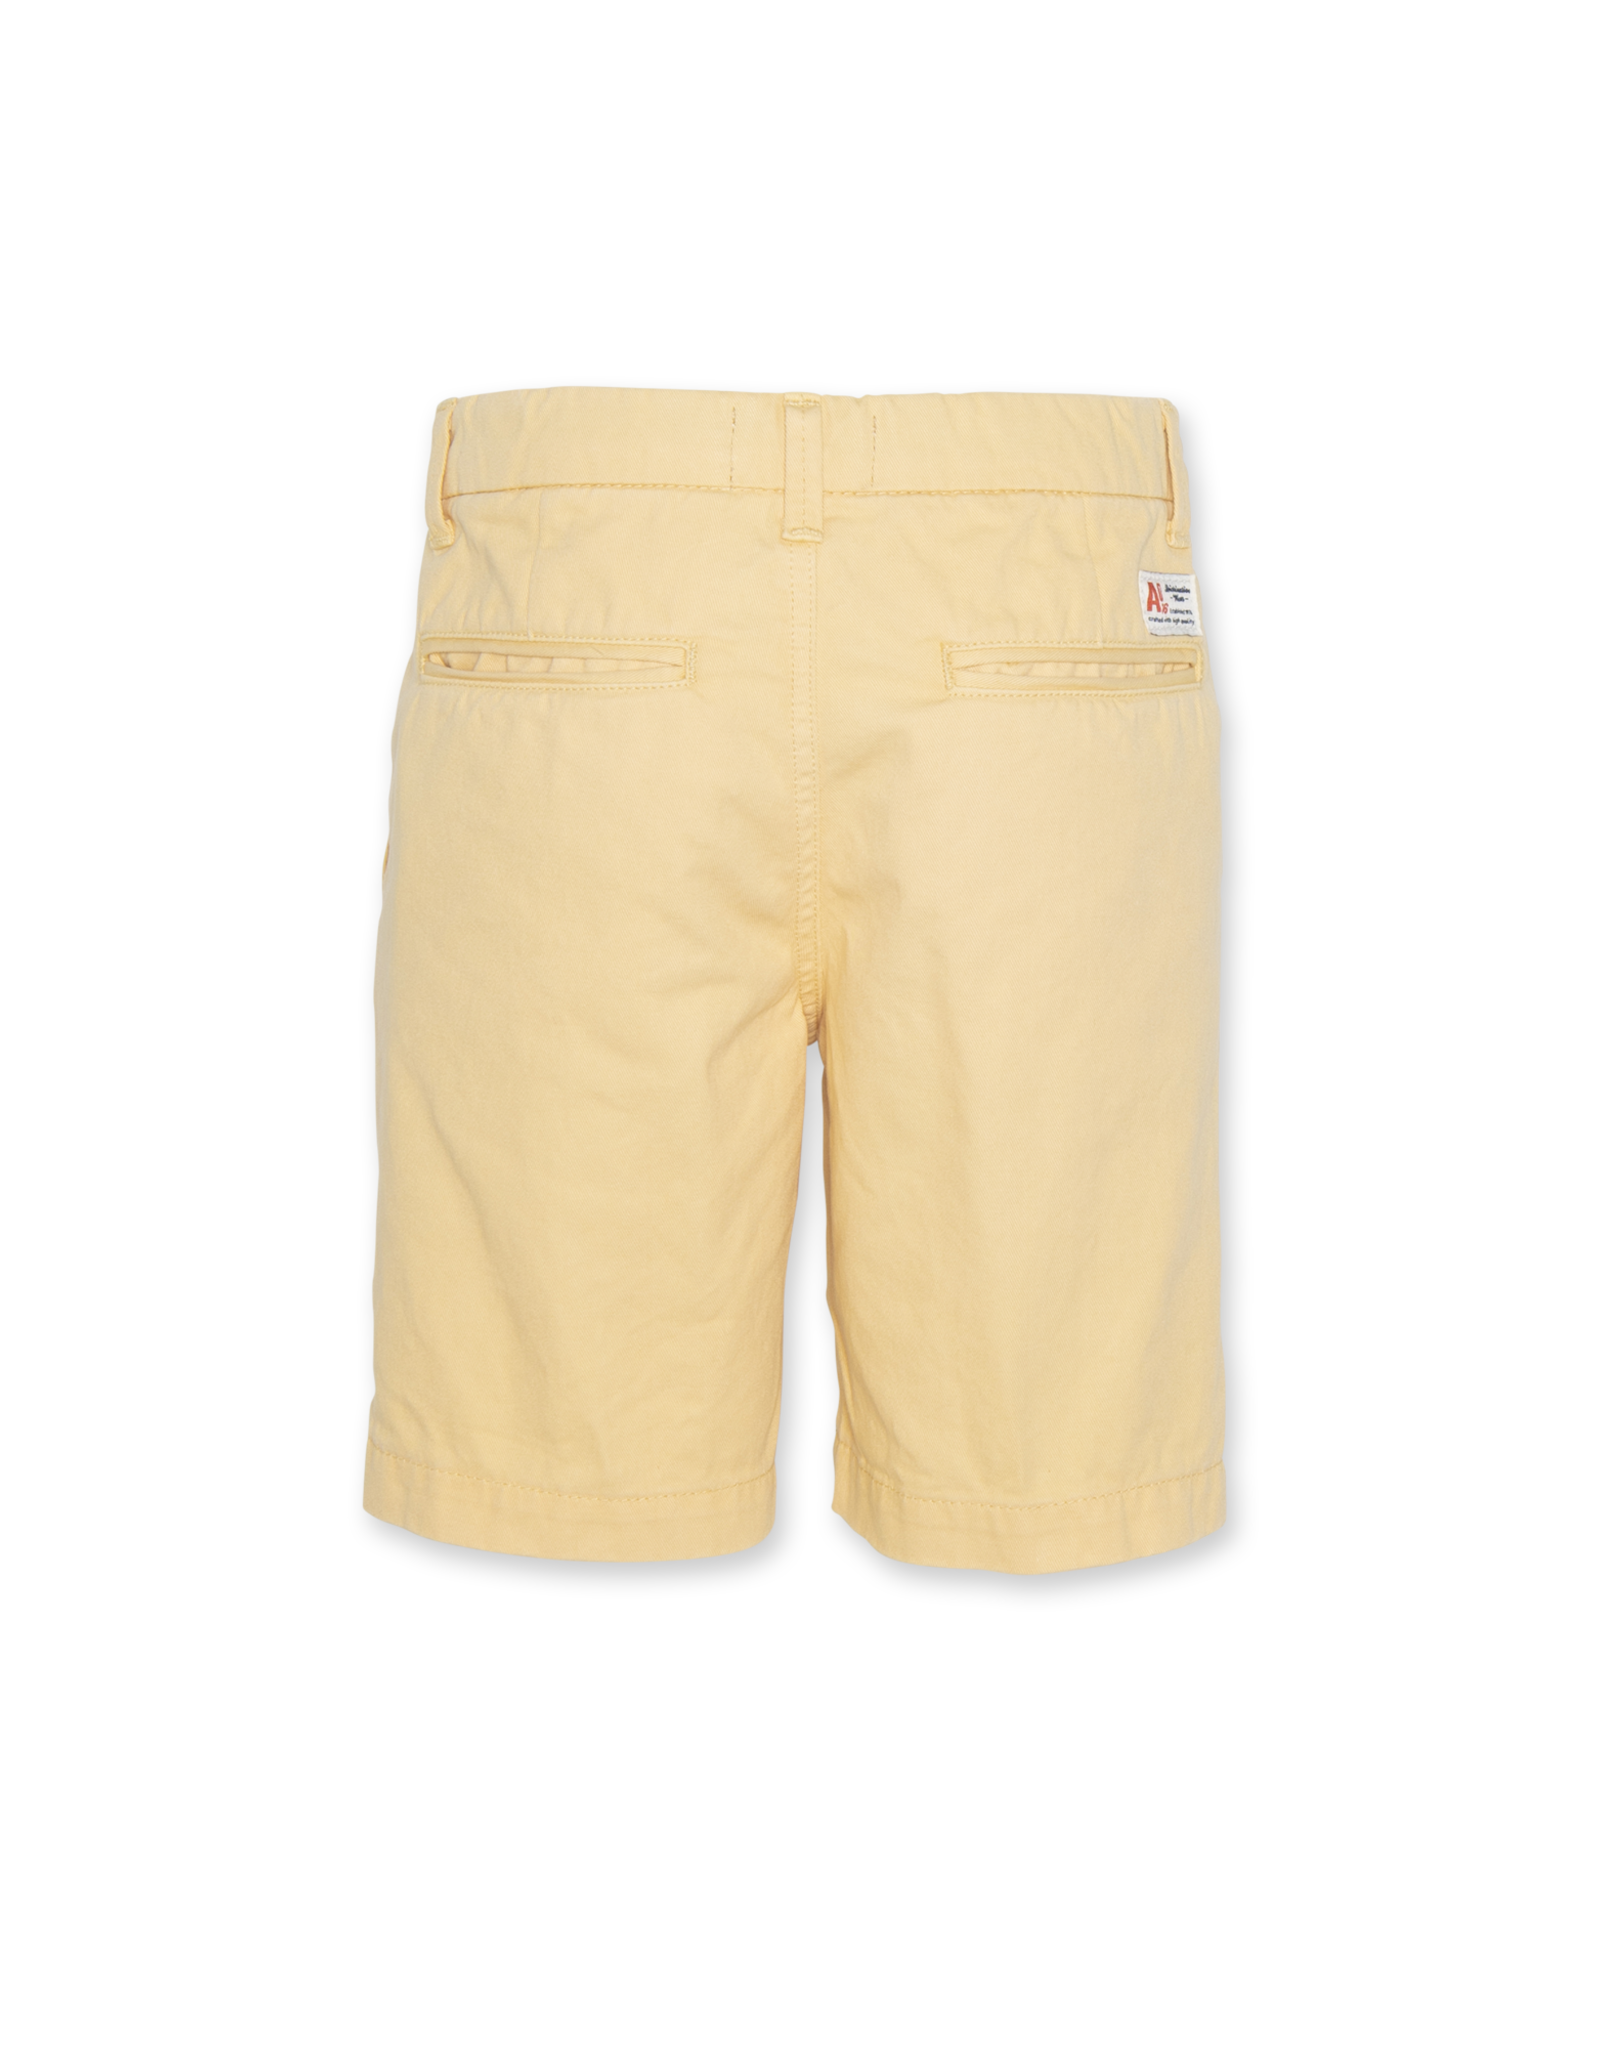 AMERICAN OUTFITTERS Ao76 Barry chino shorts peach